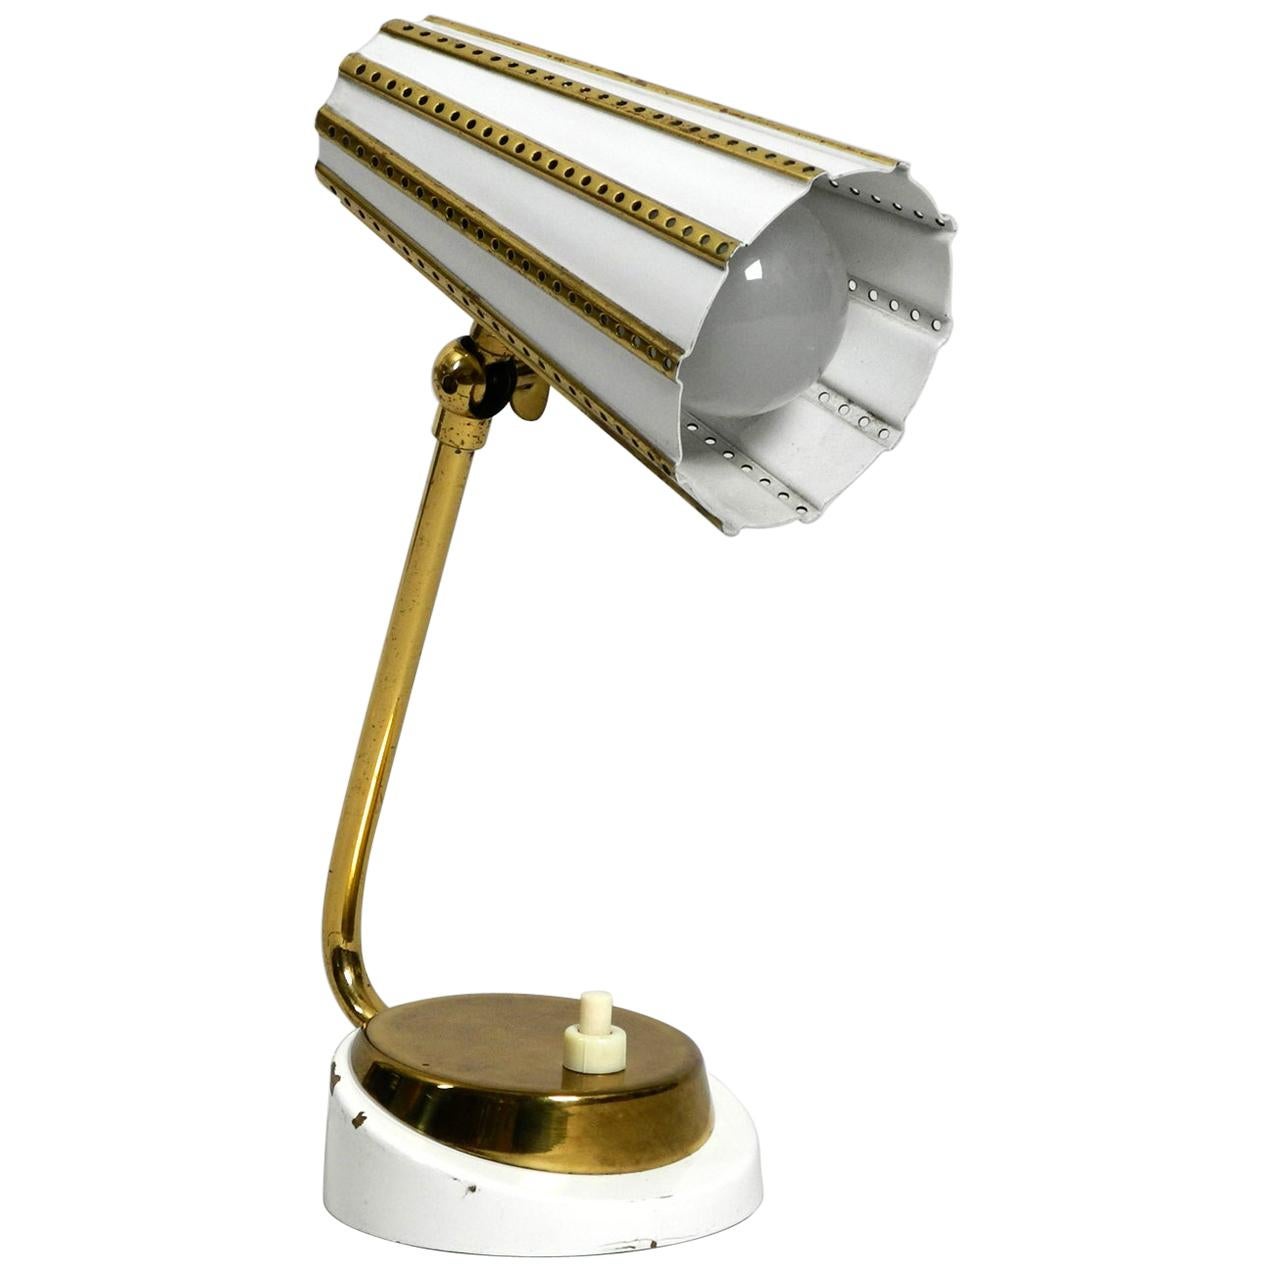 Beautiful Midcentury Brass Table Bedside Lamp with Perforated Metal Shade